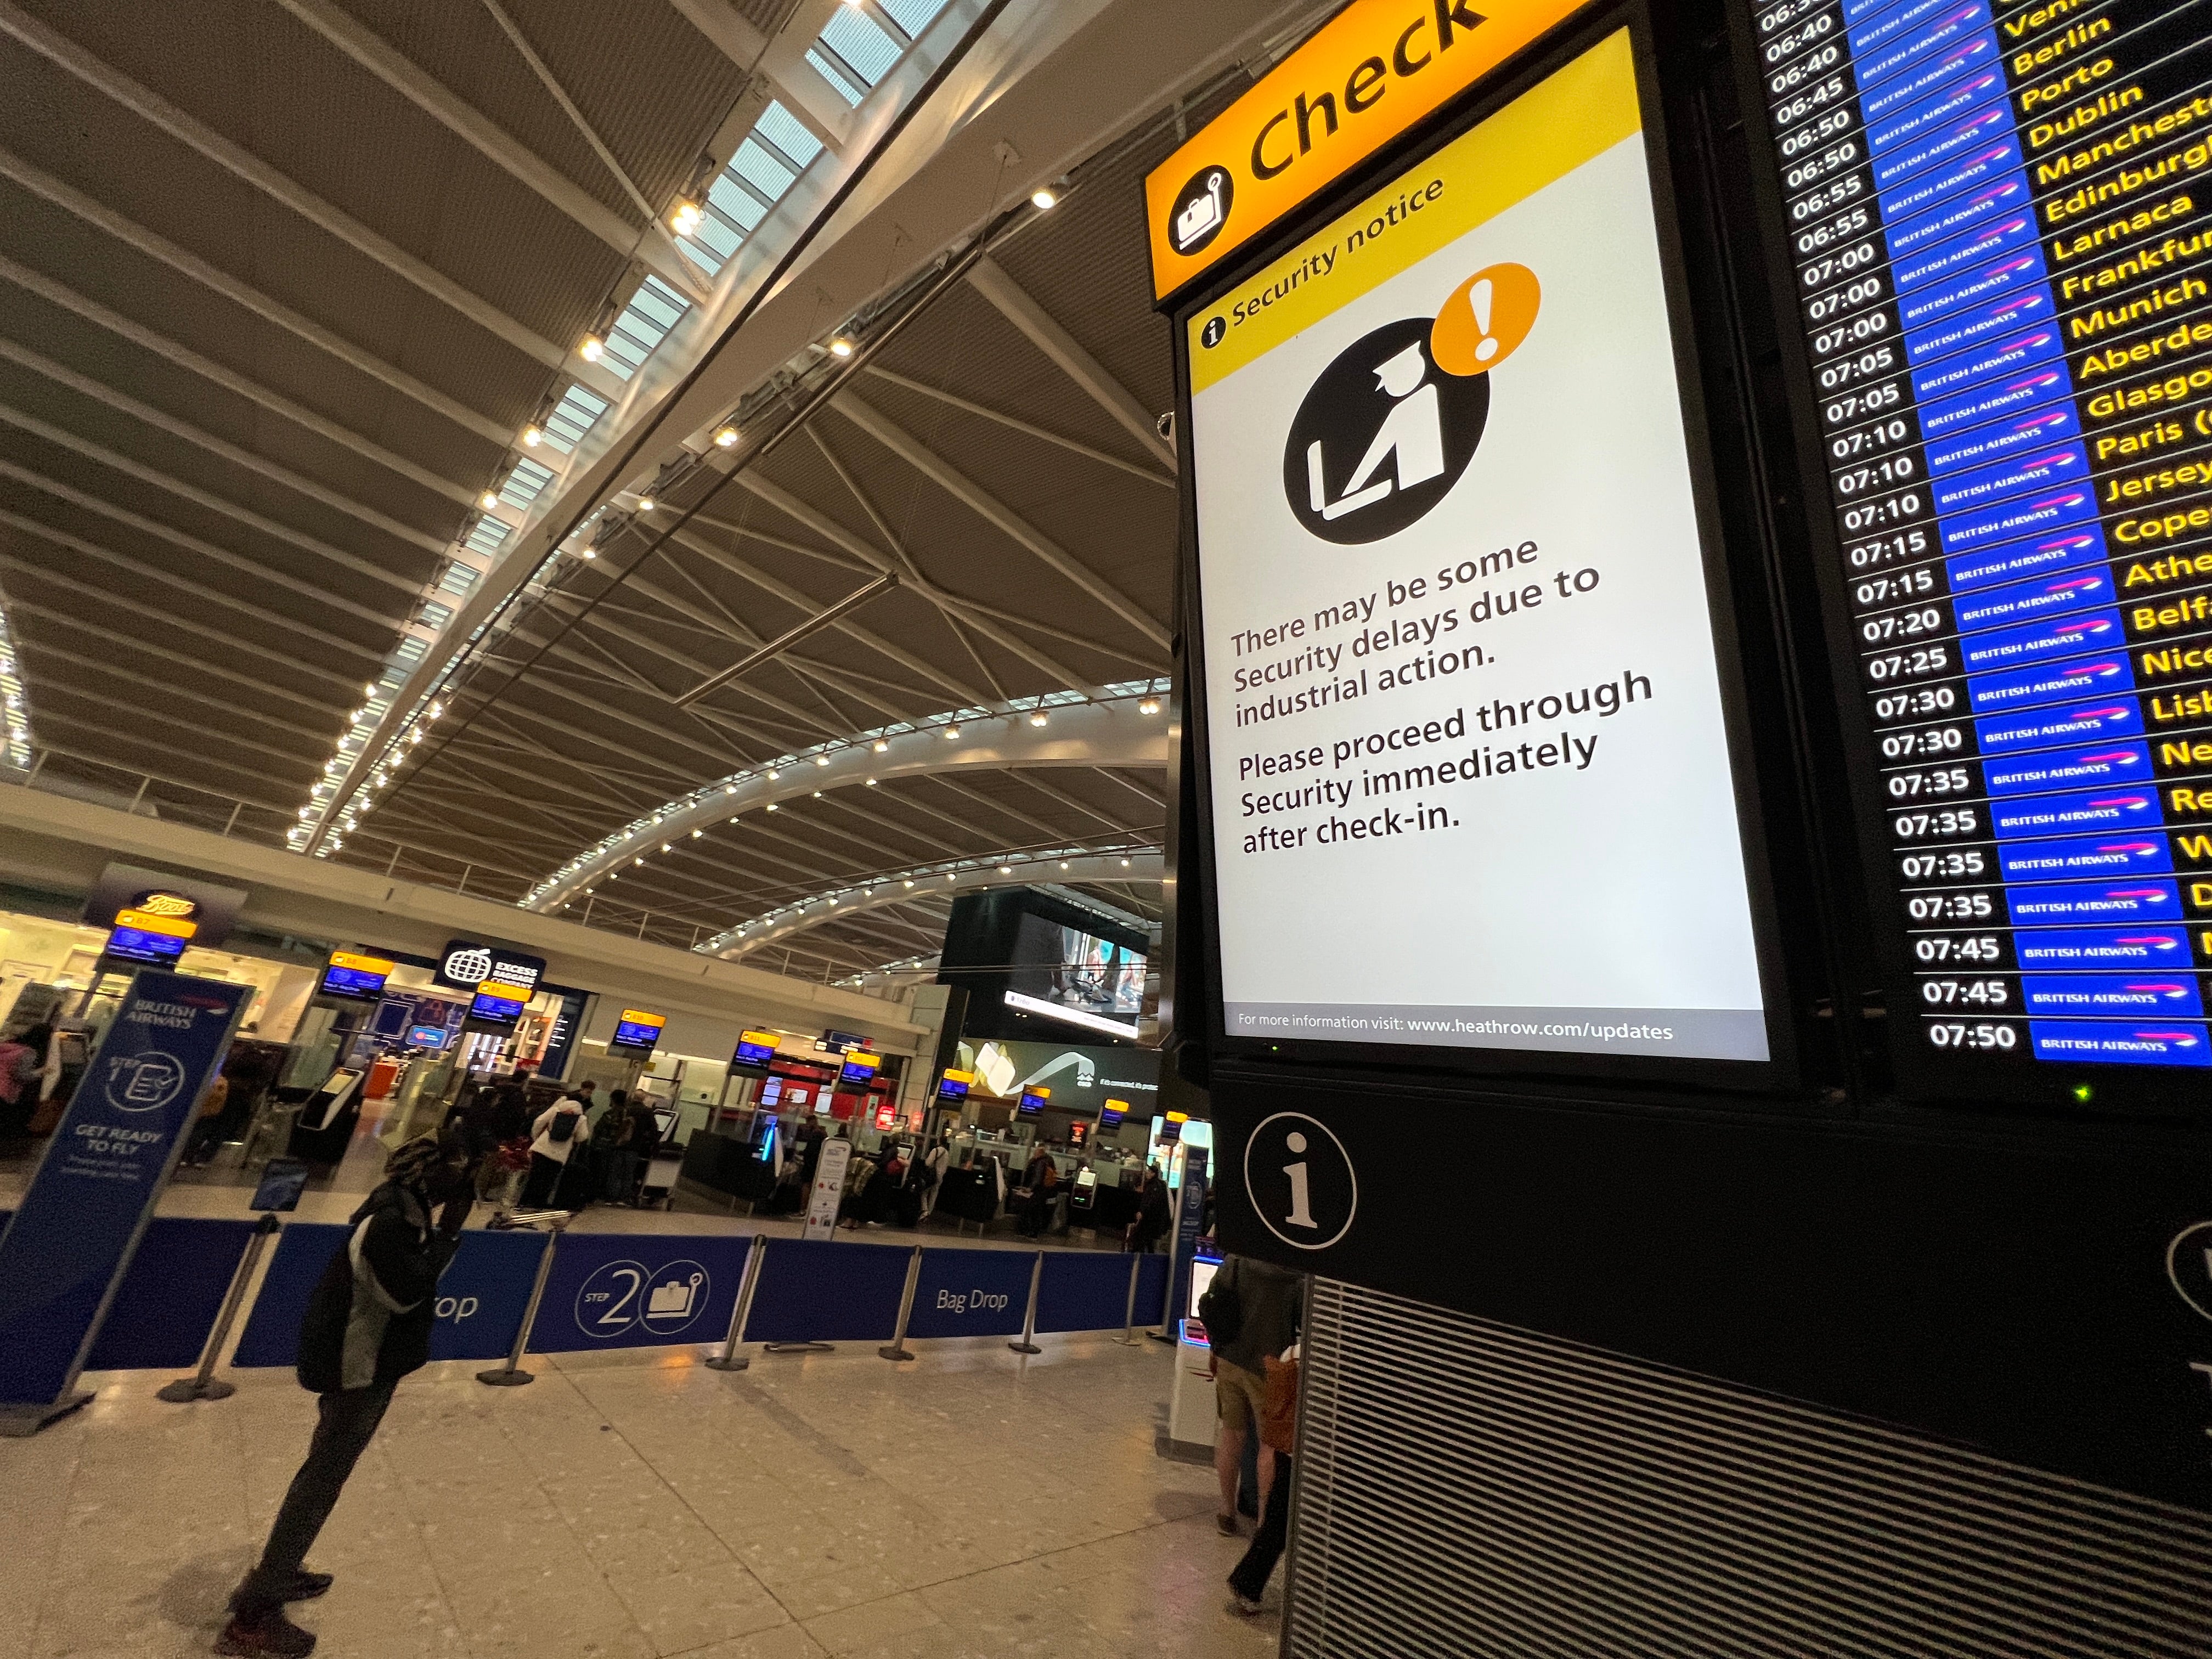 Go slow? Signs at Heathrow airport Terminal 5 warn of possible delays at security during a previous strike